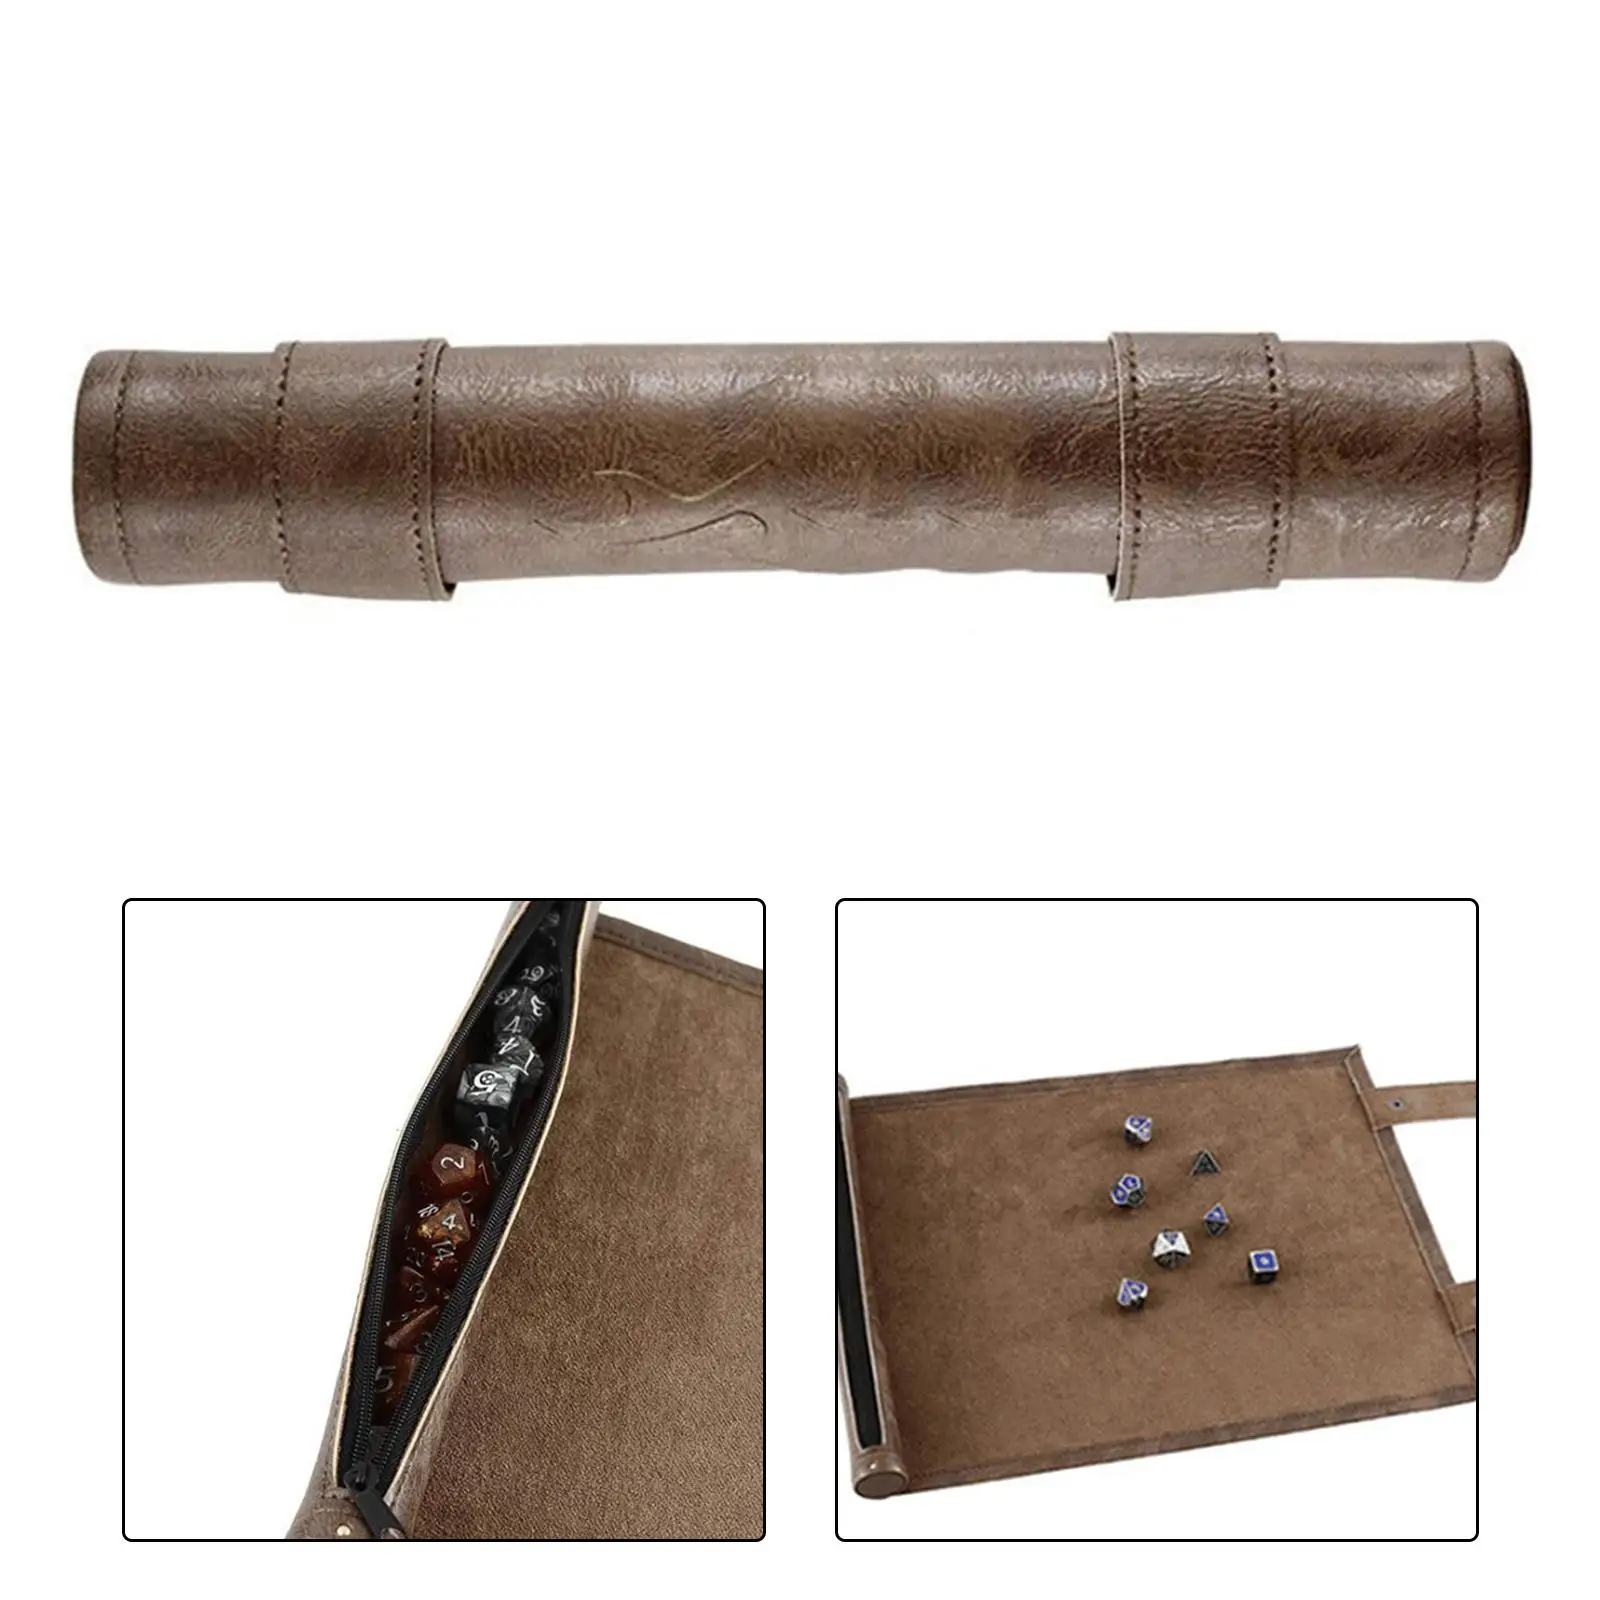 Folding Dice Rolling Tray Mat Scroll Storage Supplies Pouch Portable Holder Durable Bag for Outdoor Camping Traveling Party